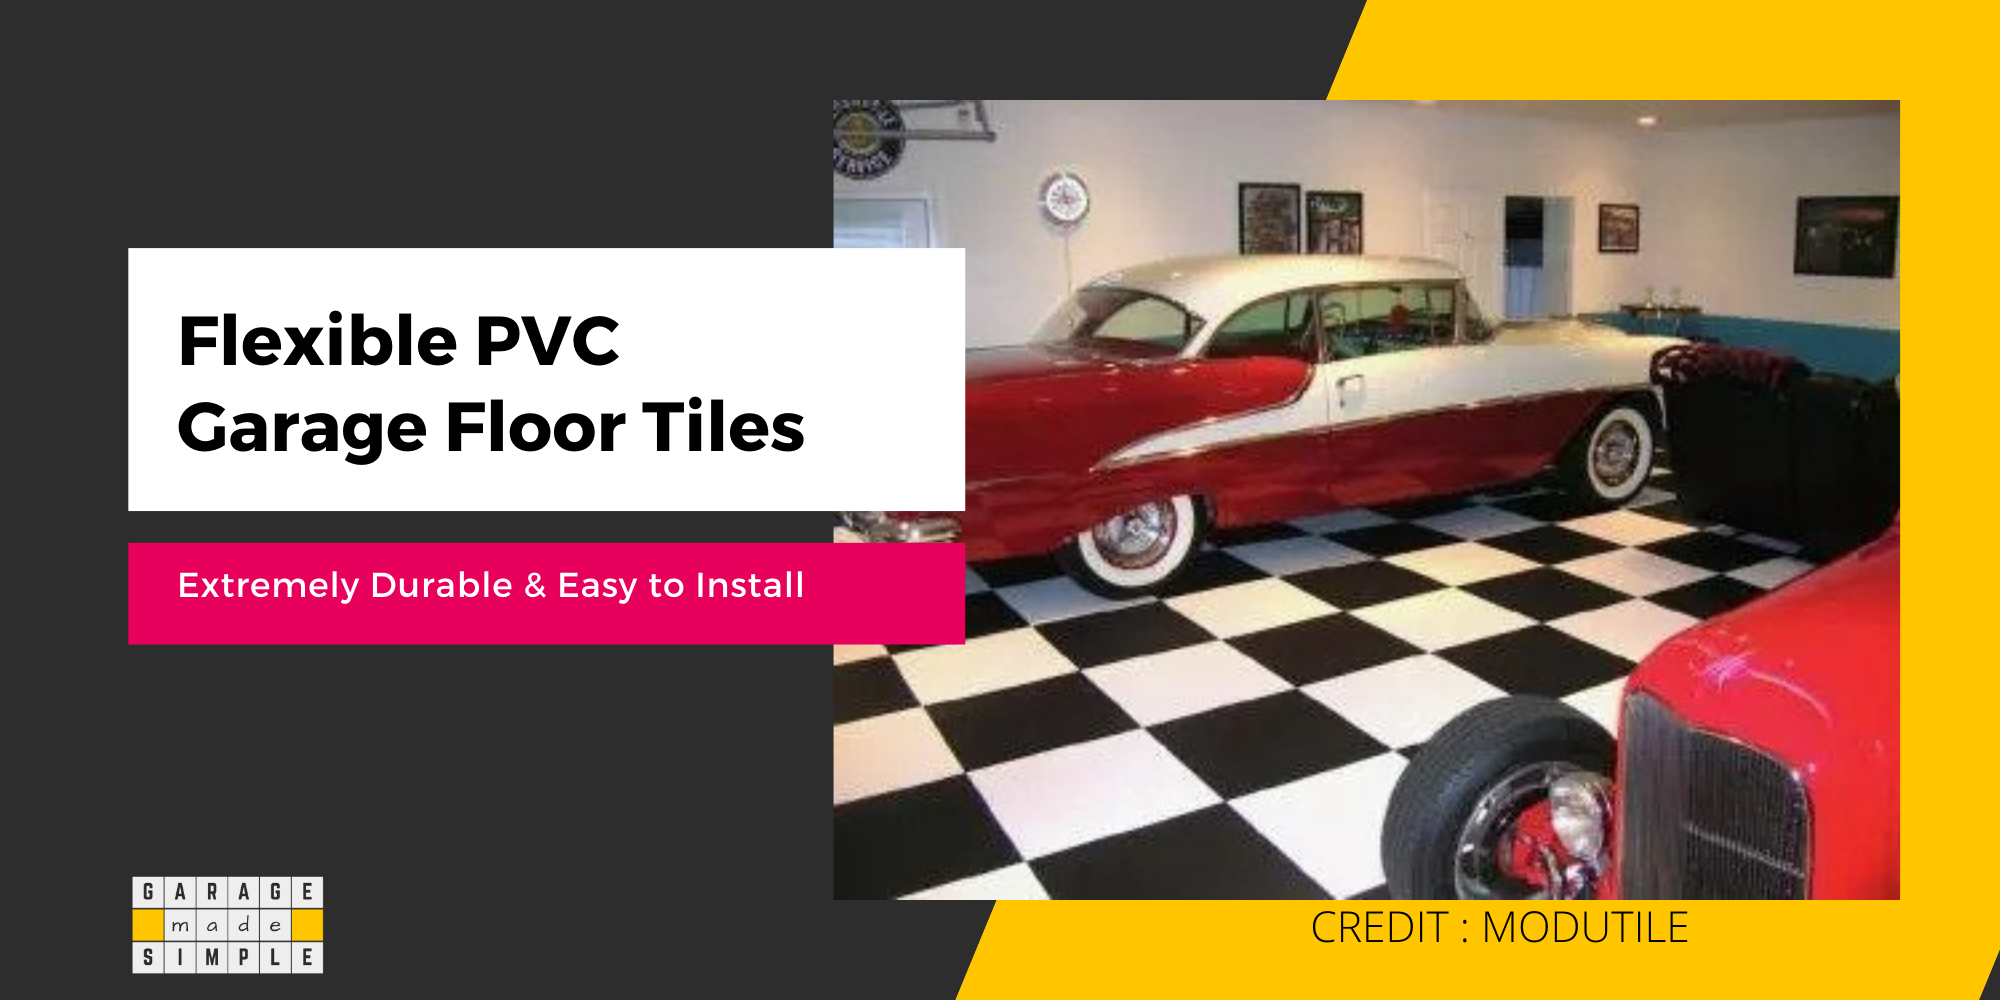 All You Need To Know About Flexible PVC Garage Floor Tiles